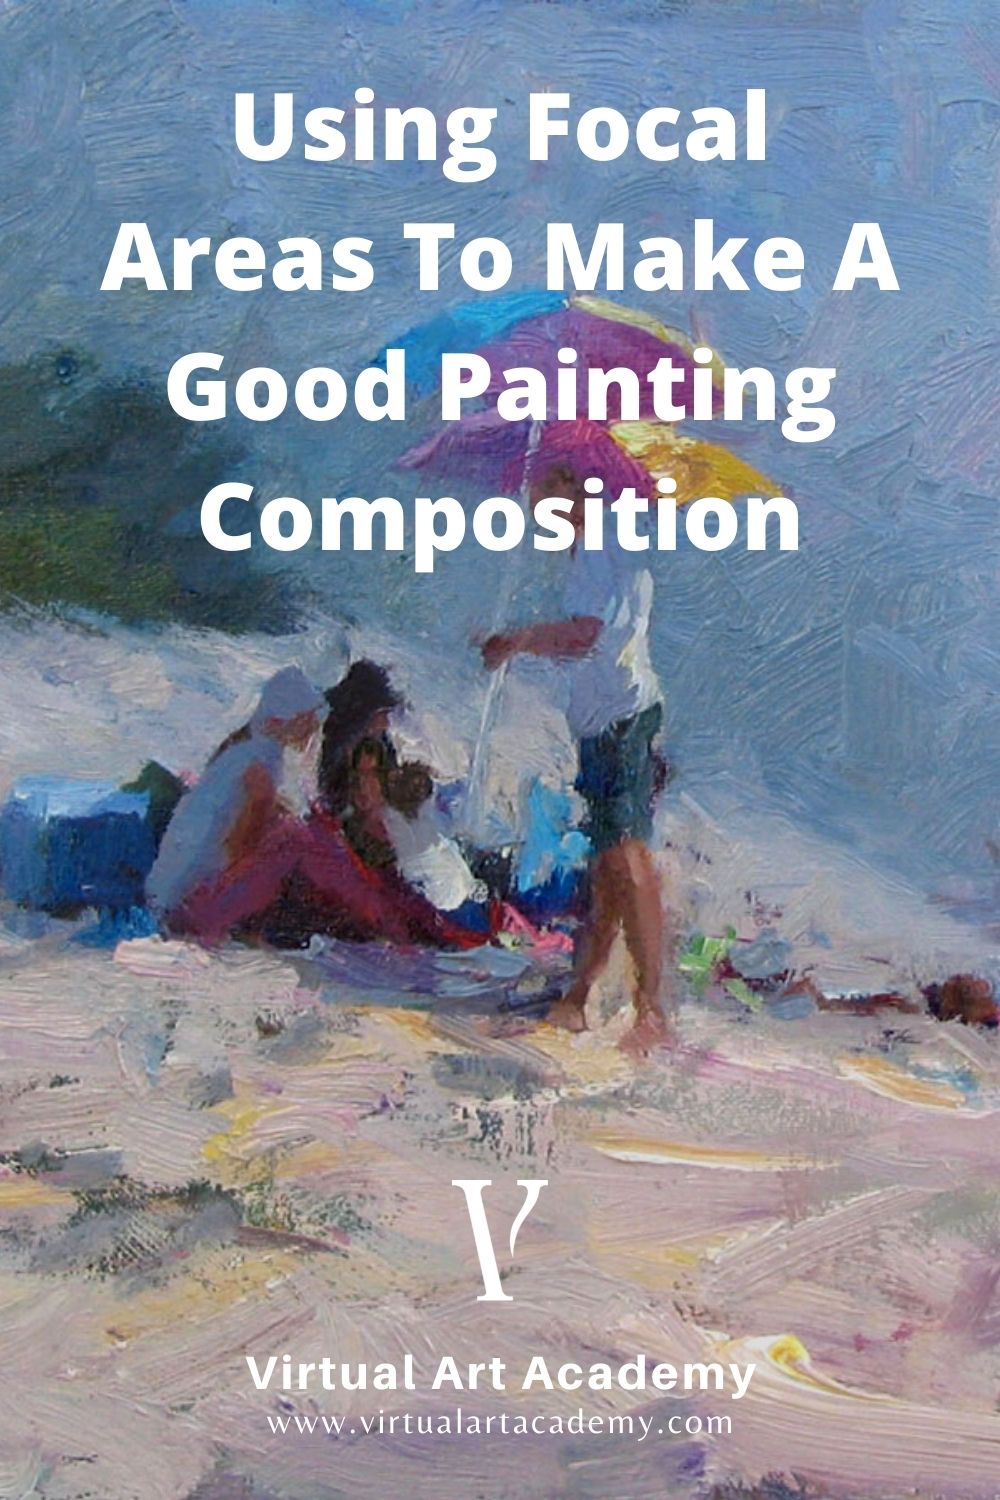 Using Focal Areas to Make a Good Painting Composition